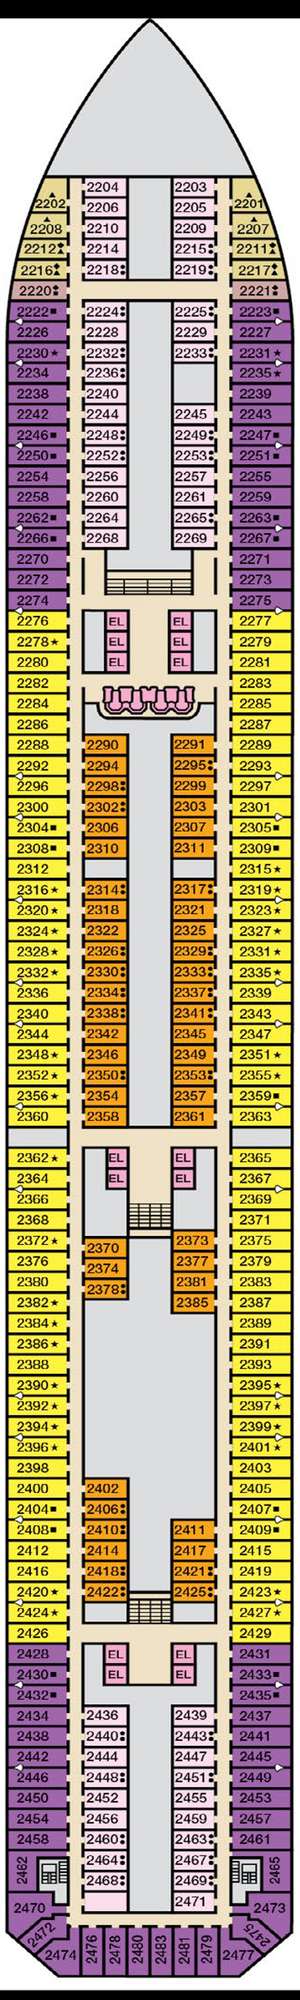 Deck plan for Carnival Freedom